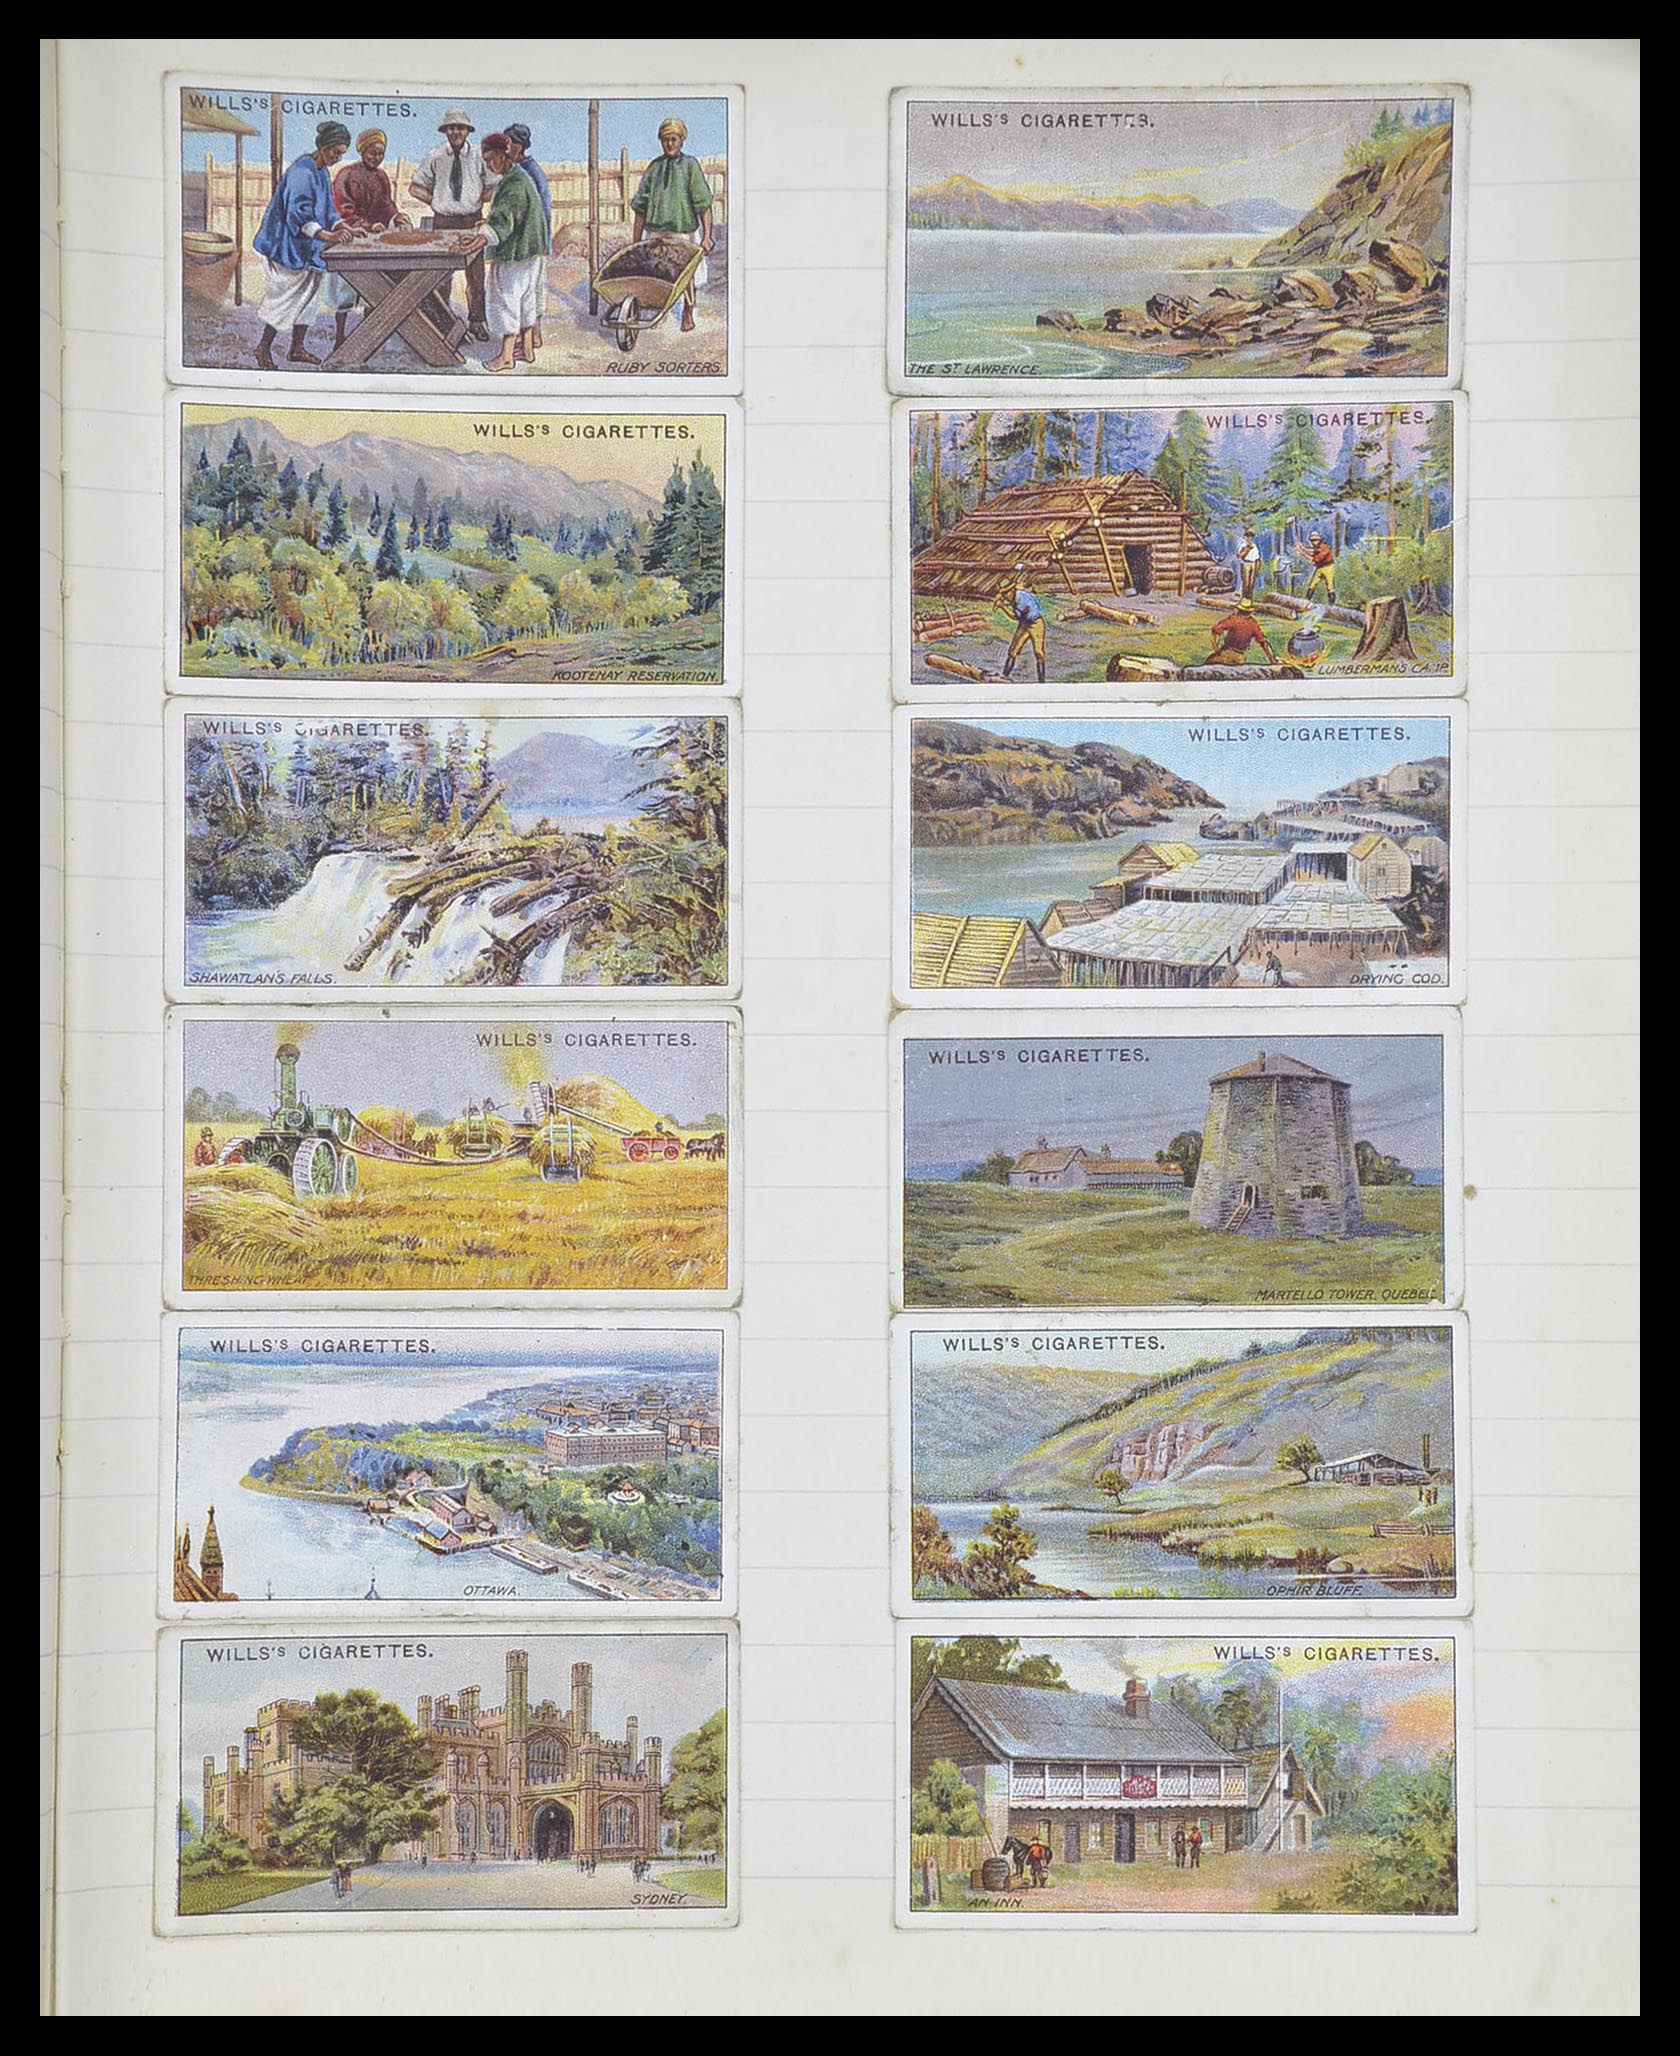 33444 109 - Stamp collection 33444 Great Britain cigarette cards.